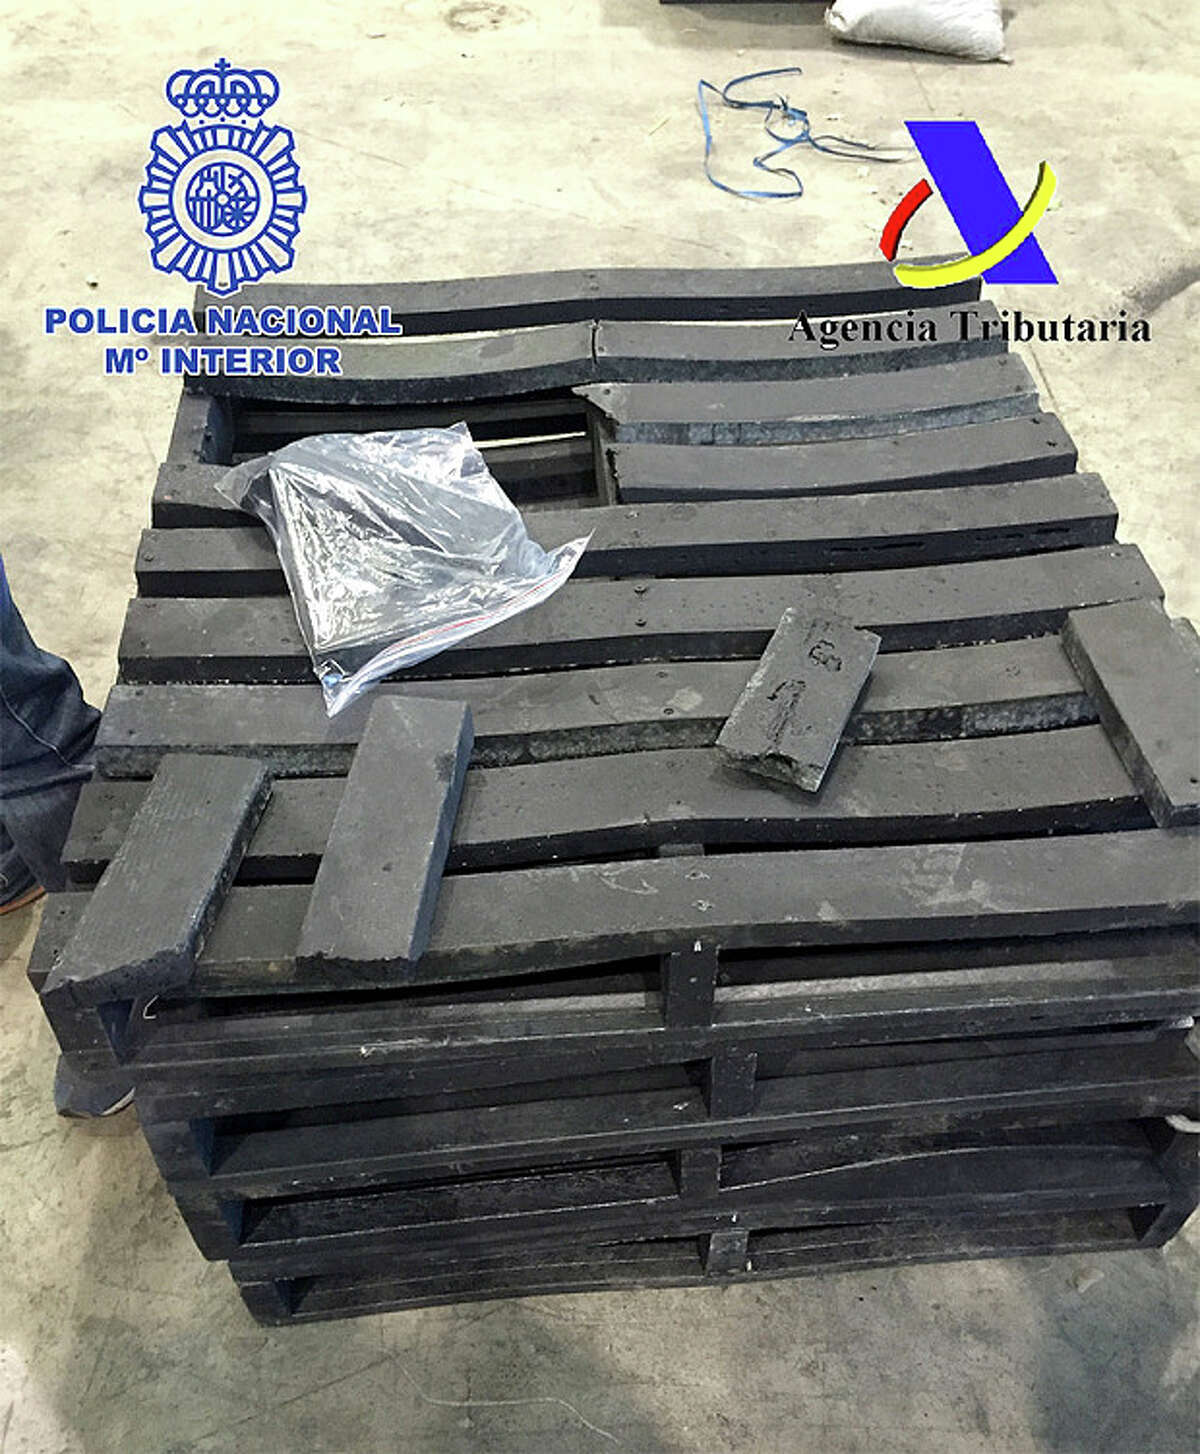 A group of smugglers were apprehended in Valencia, Spain with nearly $400 million worth of cocaine. The drug was cleverly disguised as a shipment of charcoal, with the drug molded and dyed to appear as both the charcoal and the shipping pallets.